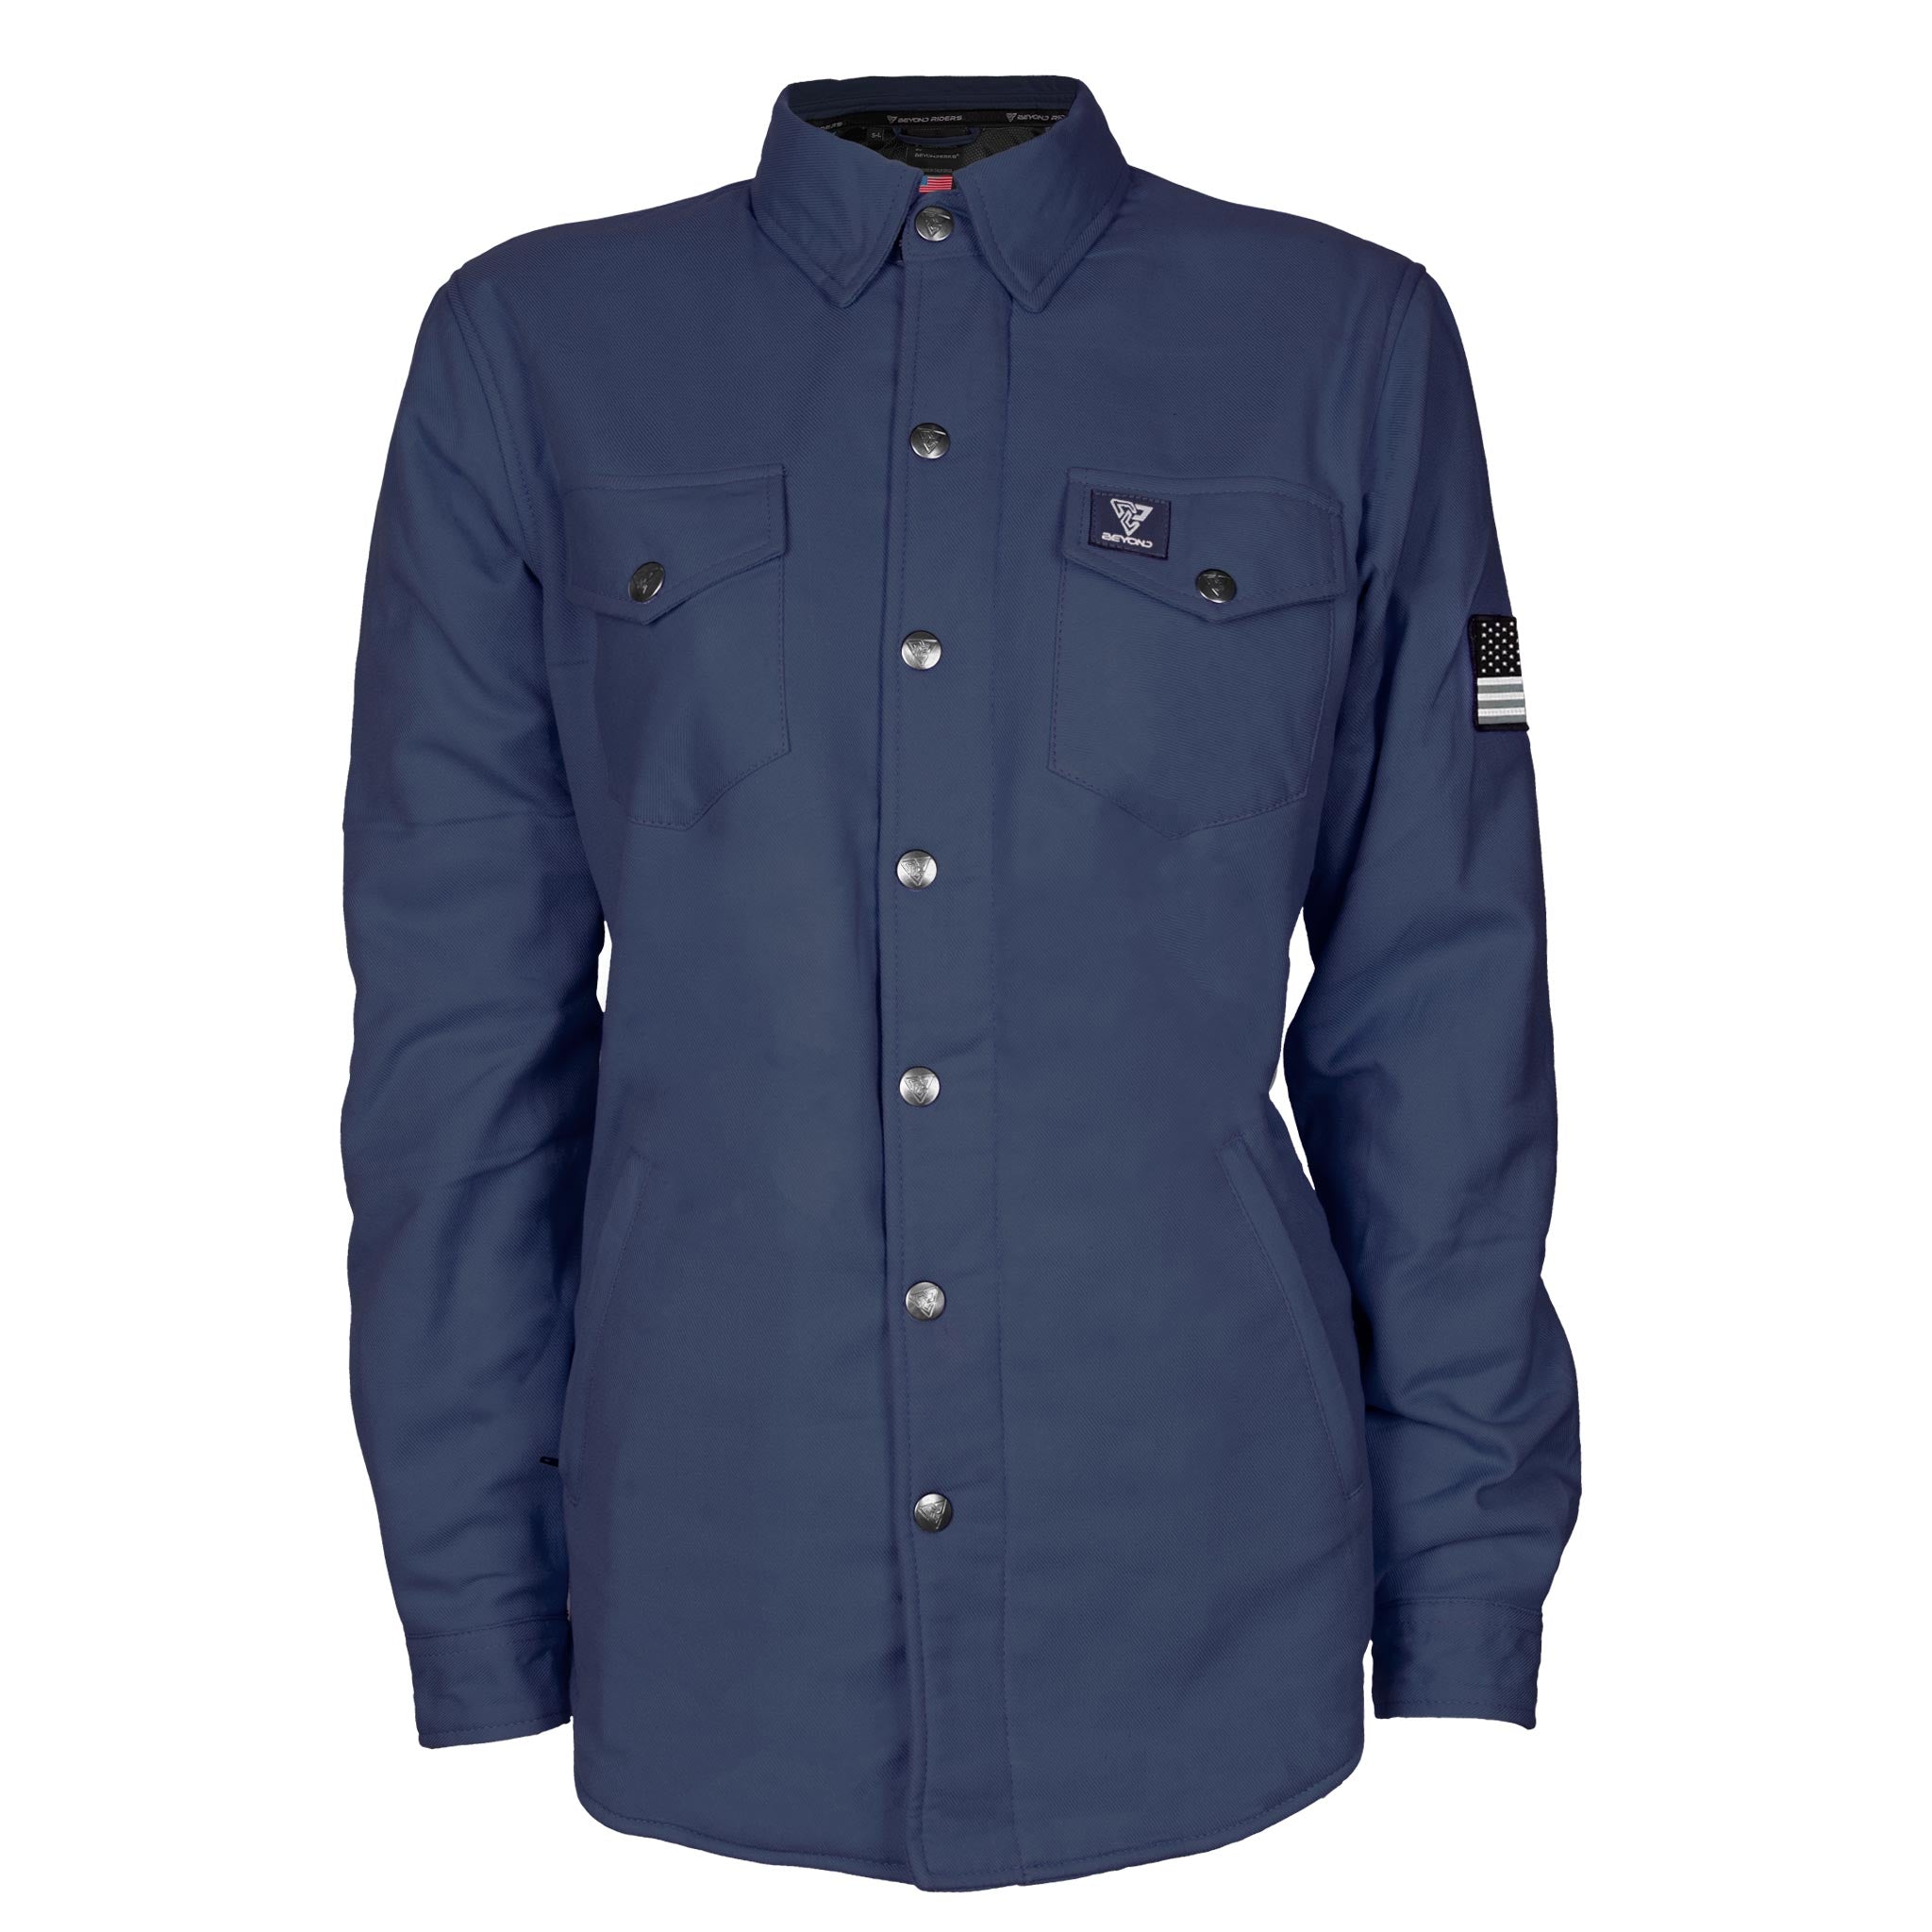 Protective Flannel Shirt for Women -  Navy Blue Solid